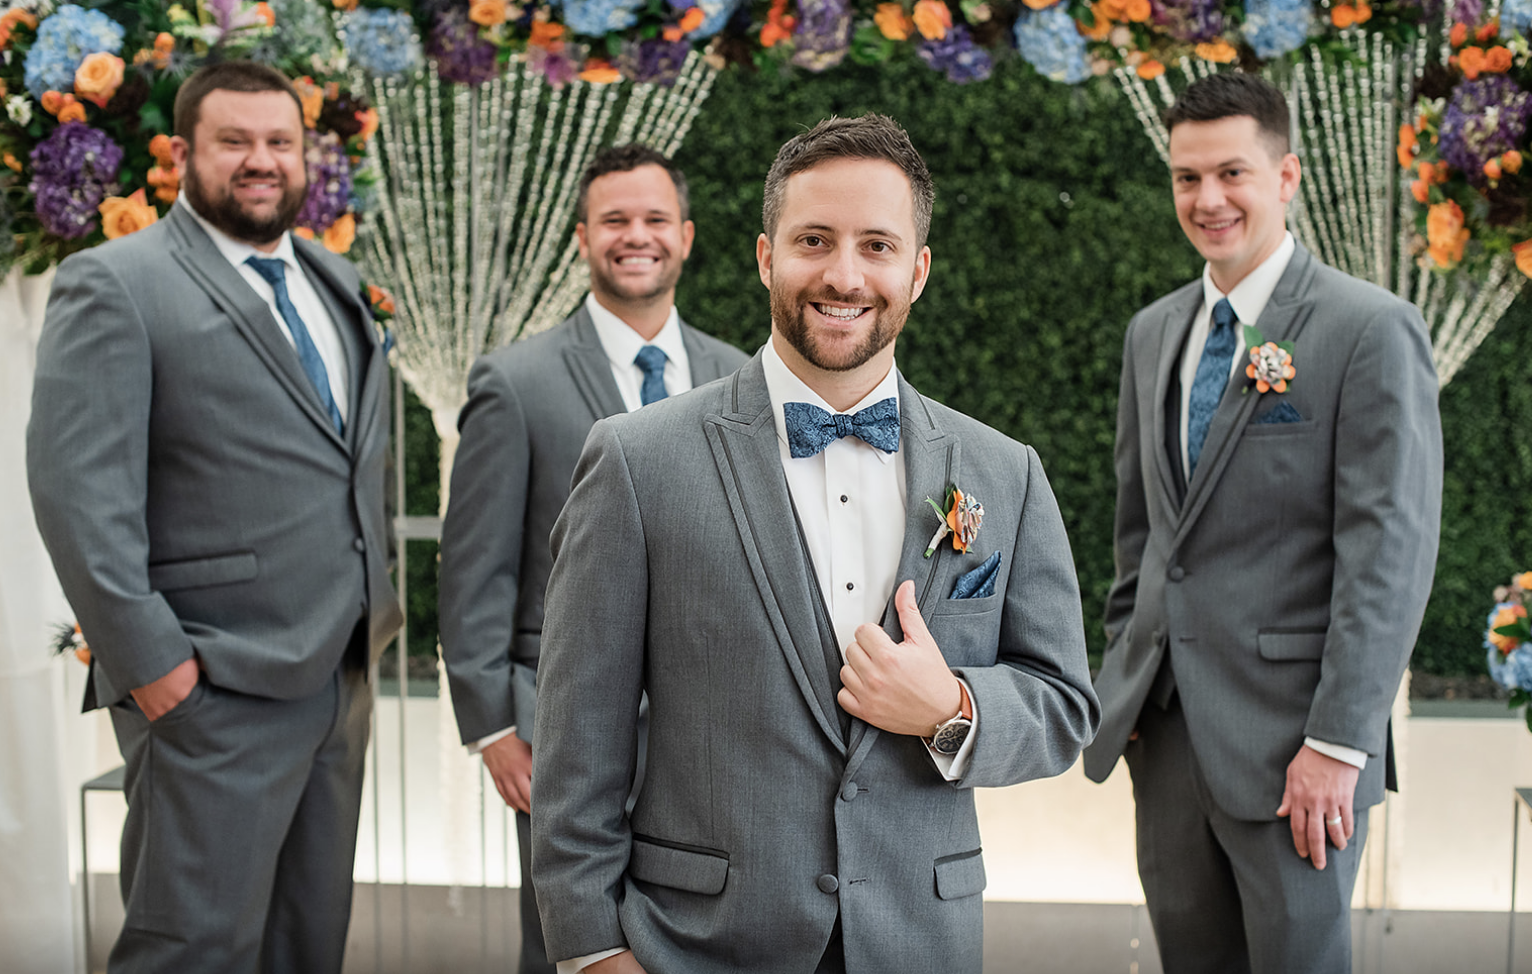 The groom smiles in front of the altar with a few of his groomsmen behind him.